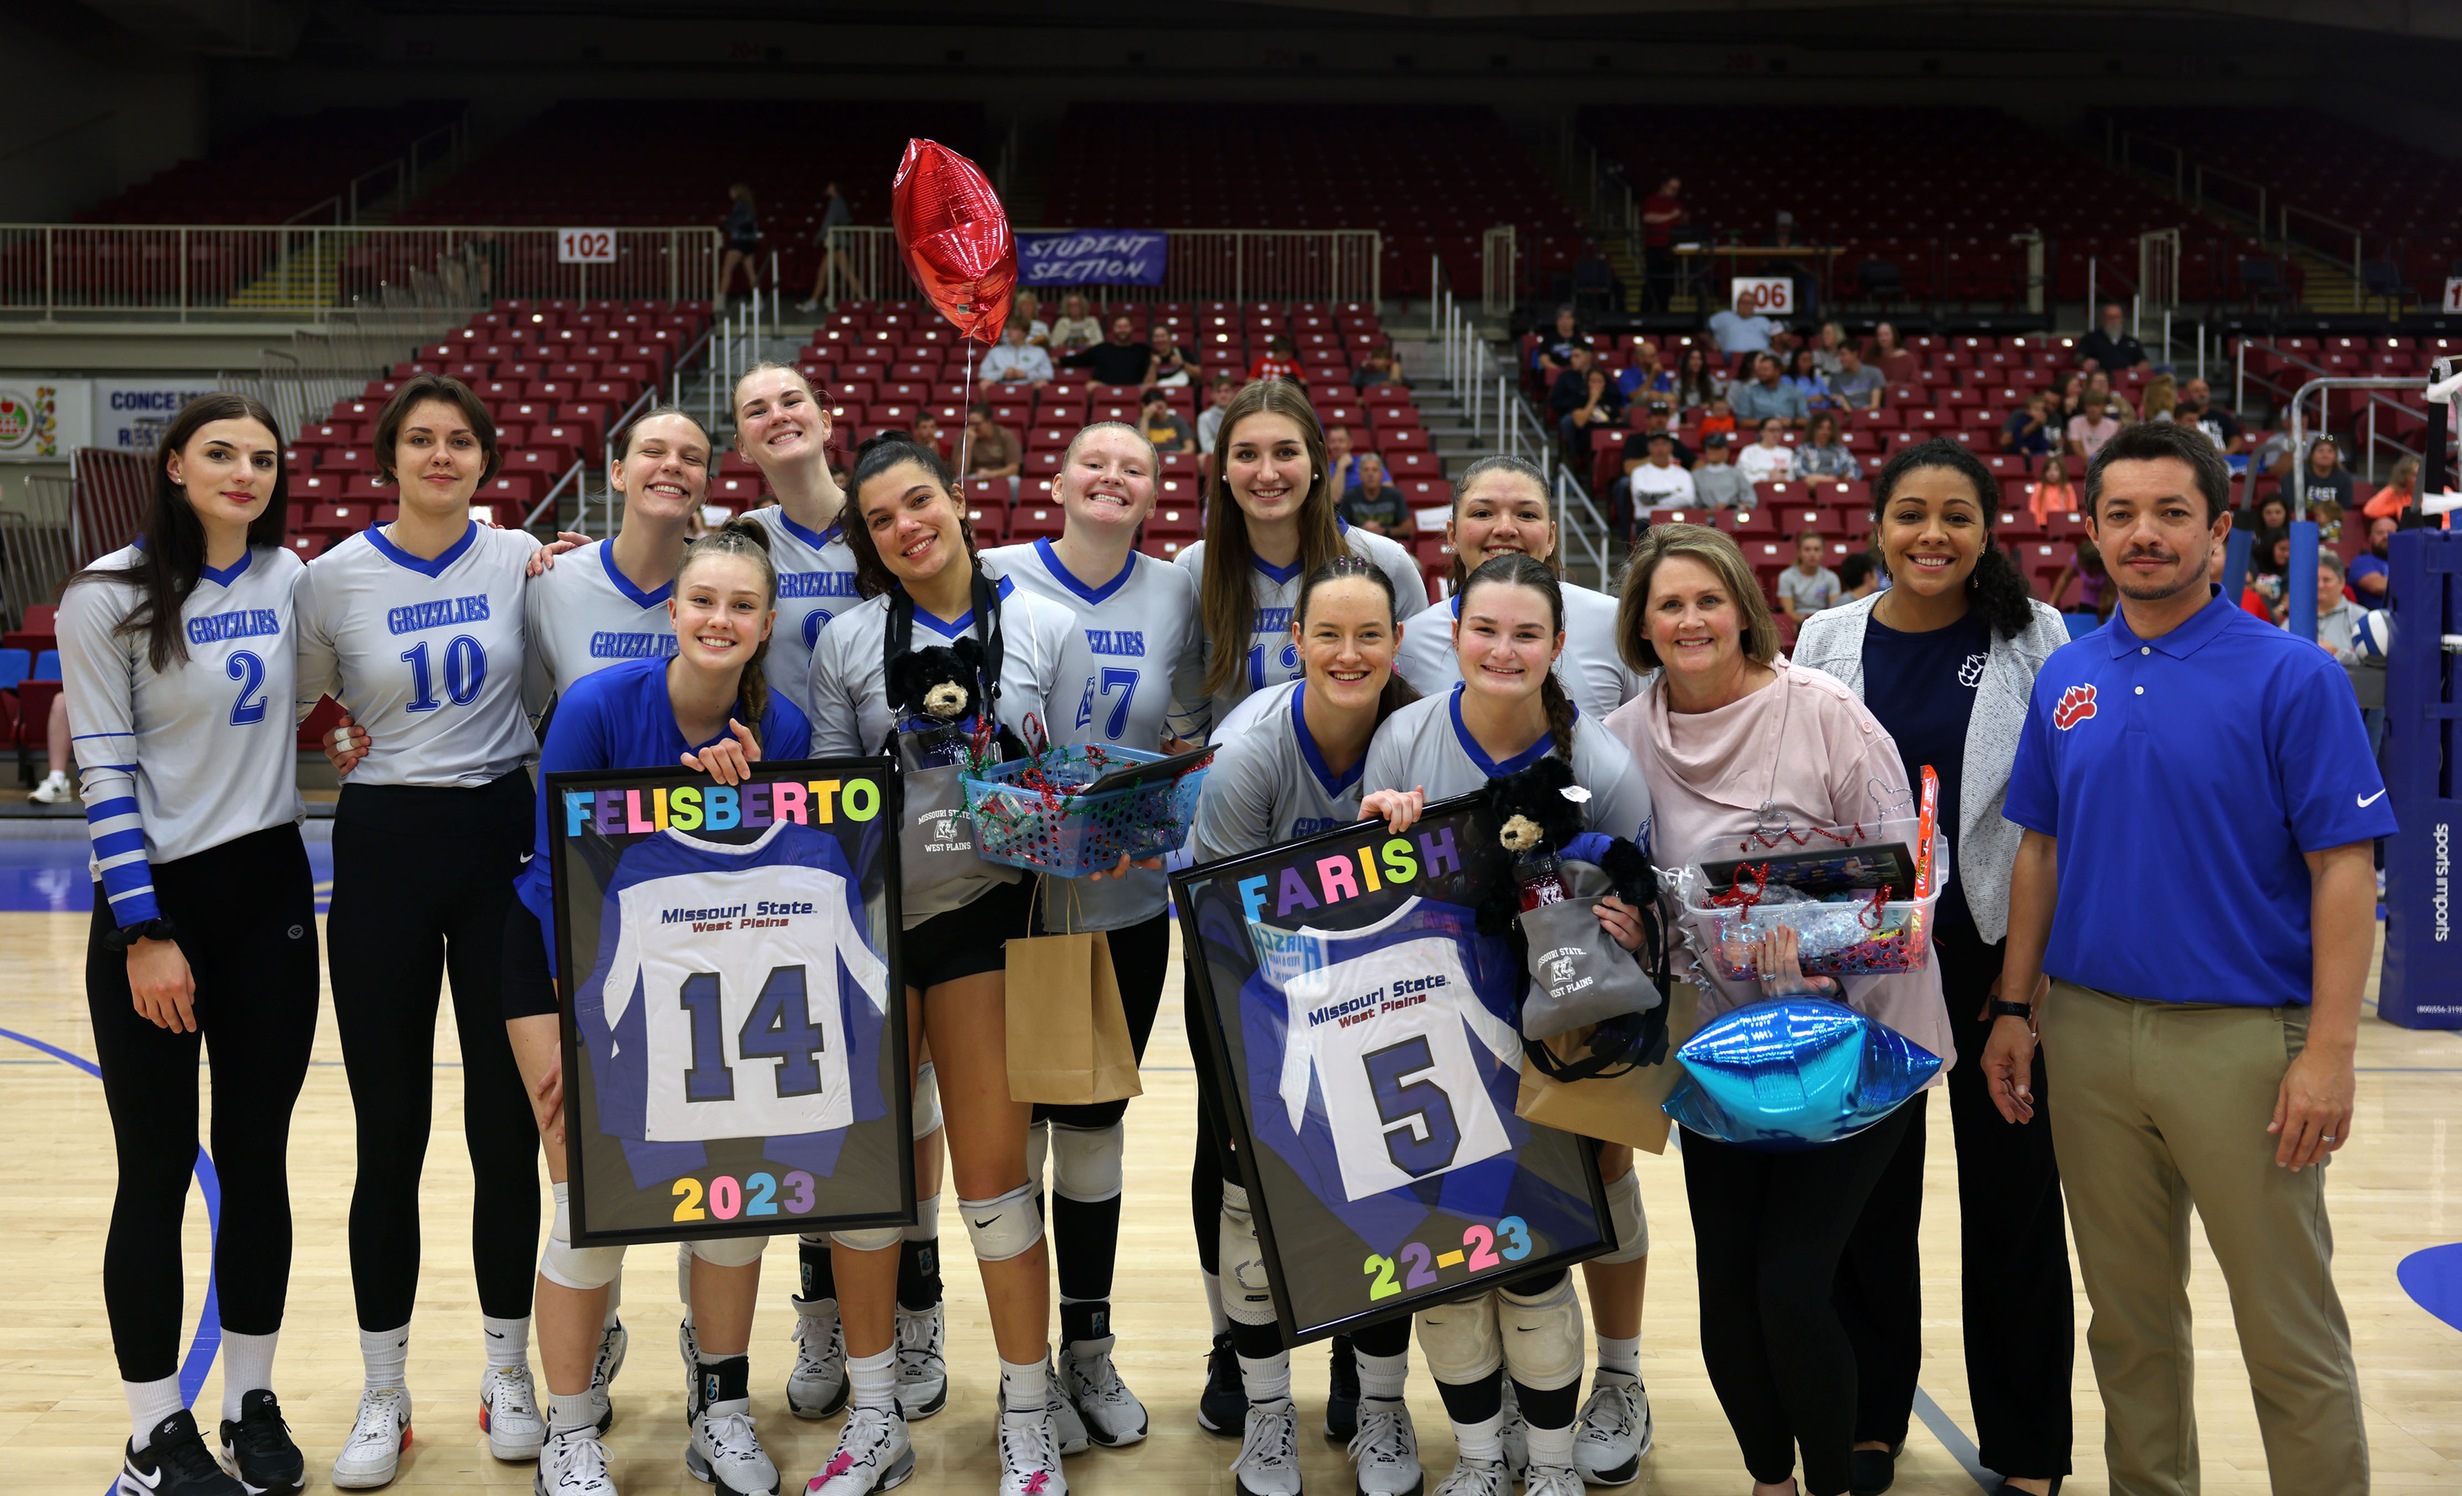 The Grizzlies celebrated their sophomores, Lauryn Farish and Raphaela Felisberto, Wednesday night during the last home game of the season. (MSU-WP Photo)